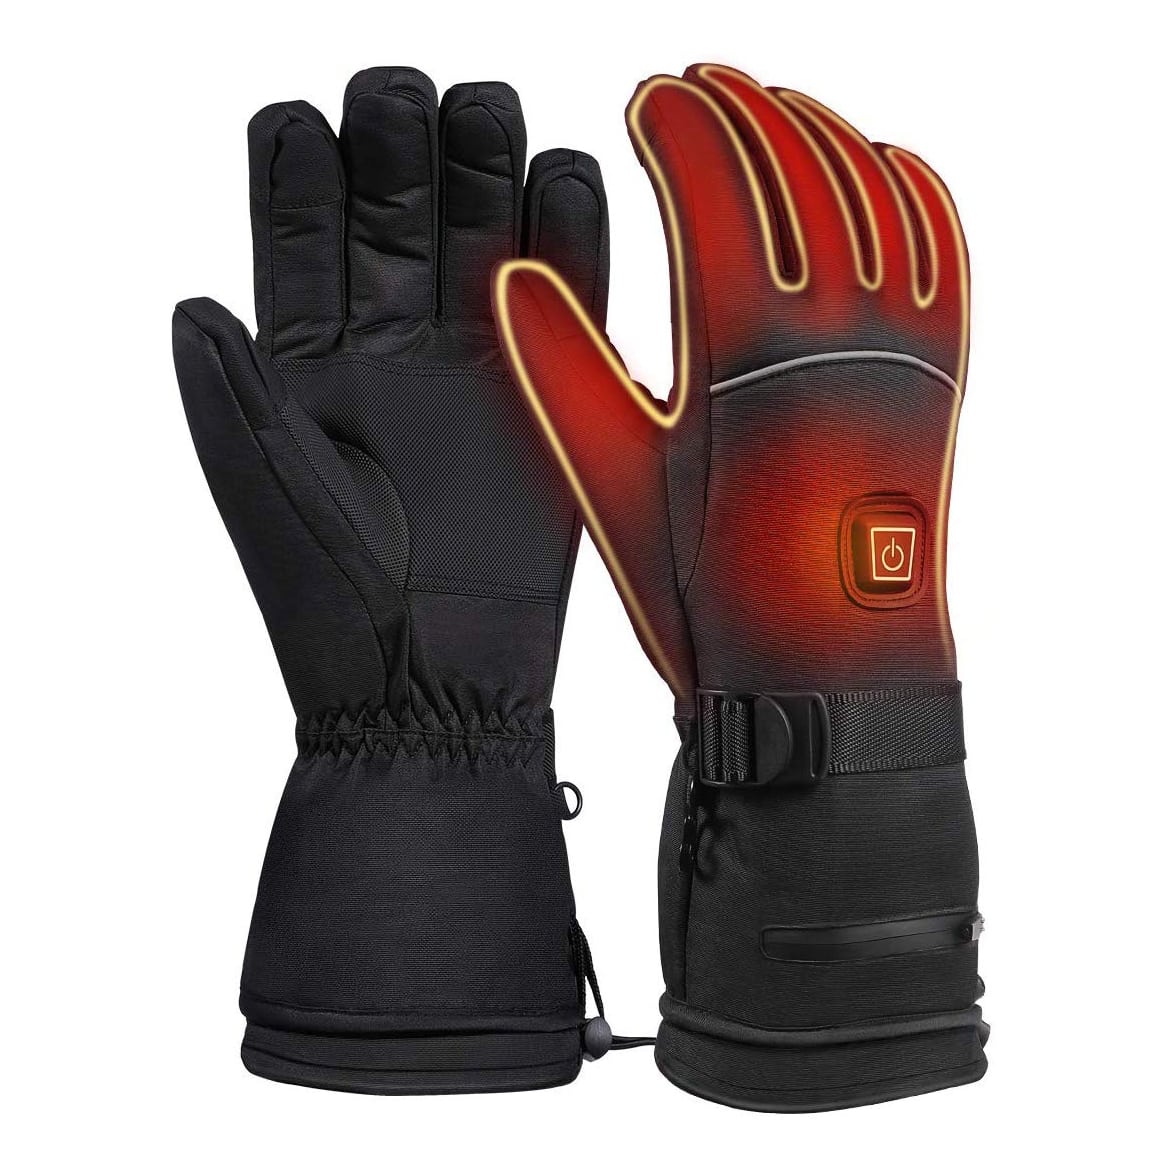 Top 10 Best Heated Ski Gloves in 2023 Reviews Buyer's Guide